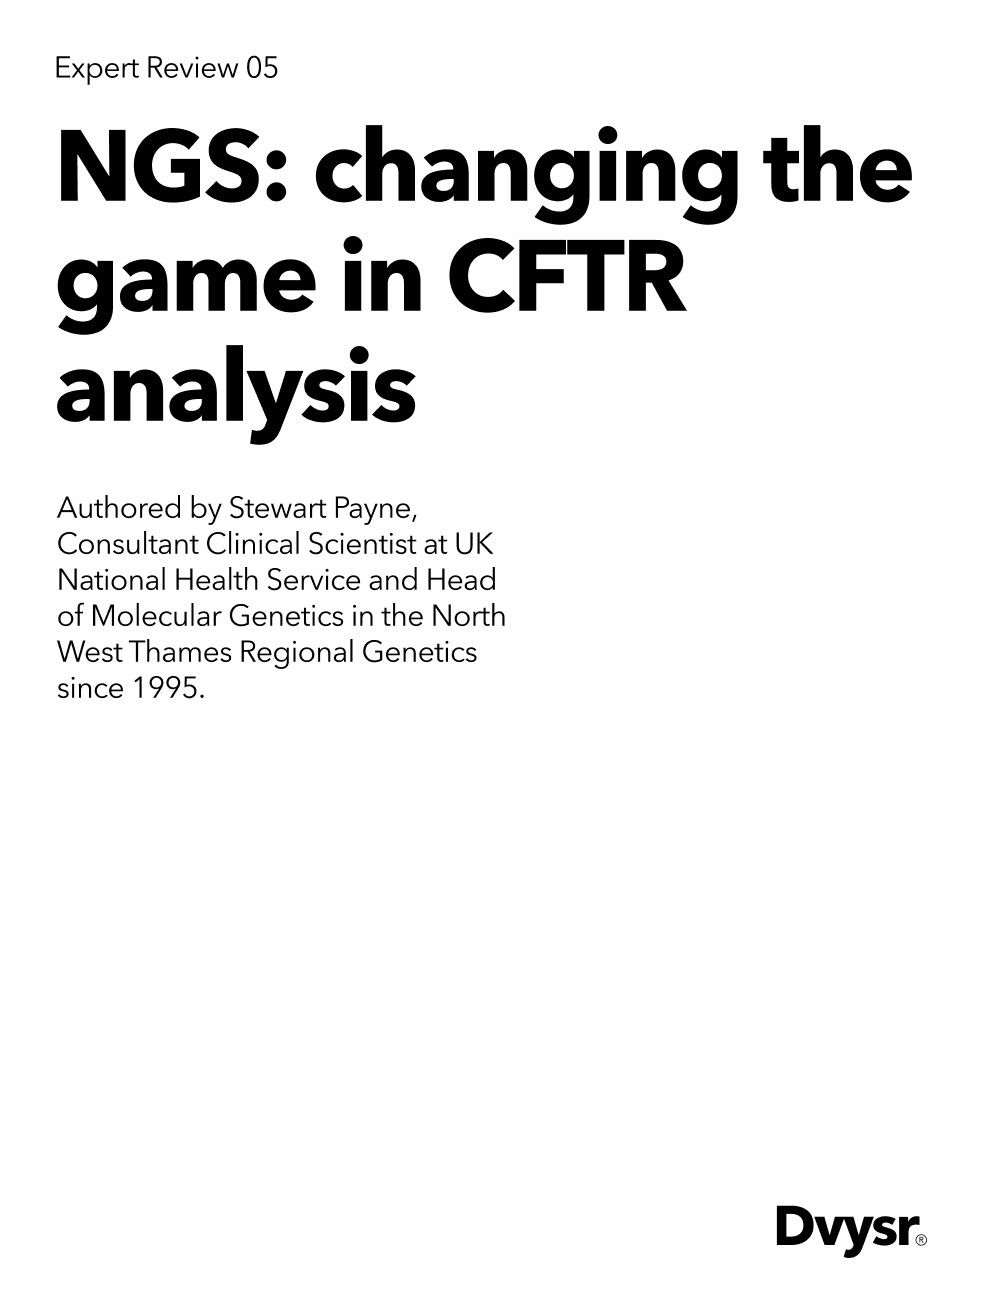 NGS: Changing the game in CFTR analysis